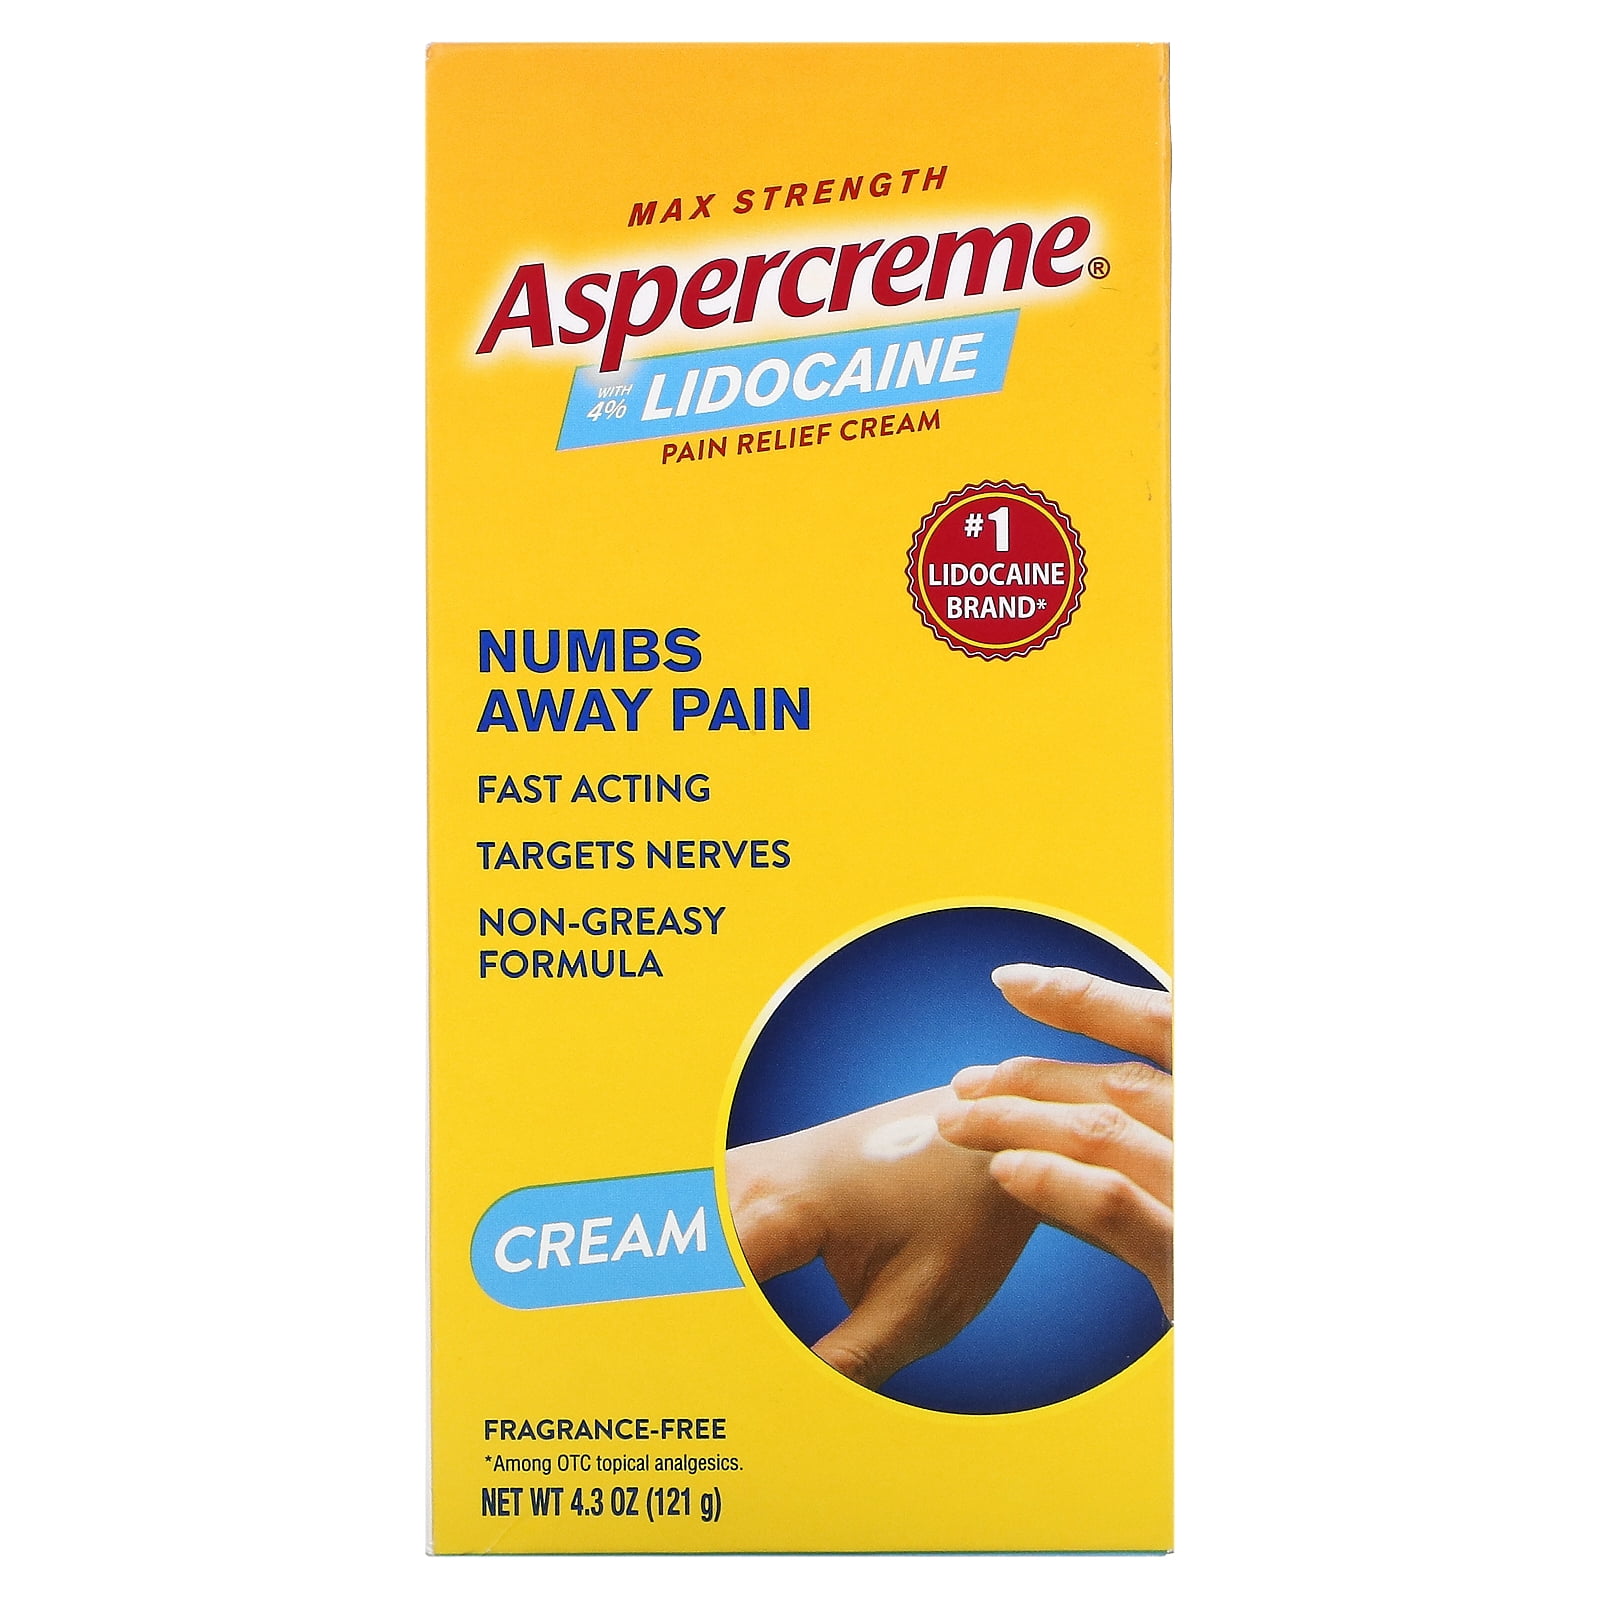 Aspercreme Max Strength Topical Pain Reliever Cream and Muscle Rub for Nerve Pain Relief, 4% Lidocaine Numbing Cream, 4.3 oz - image 3 of 6